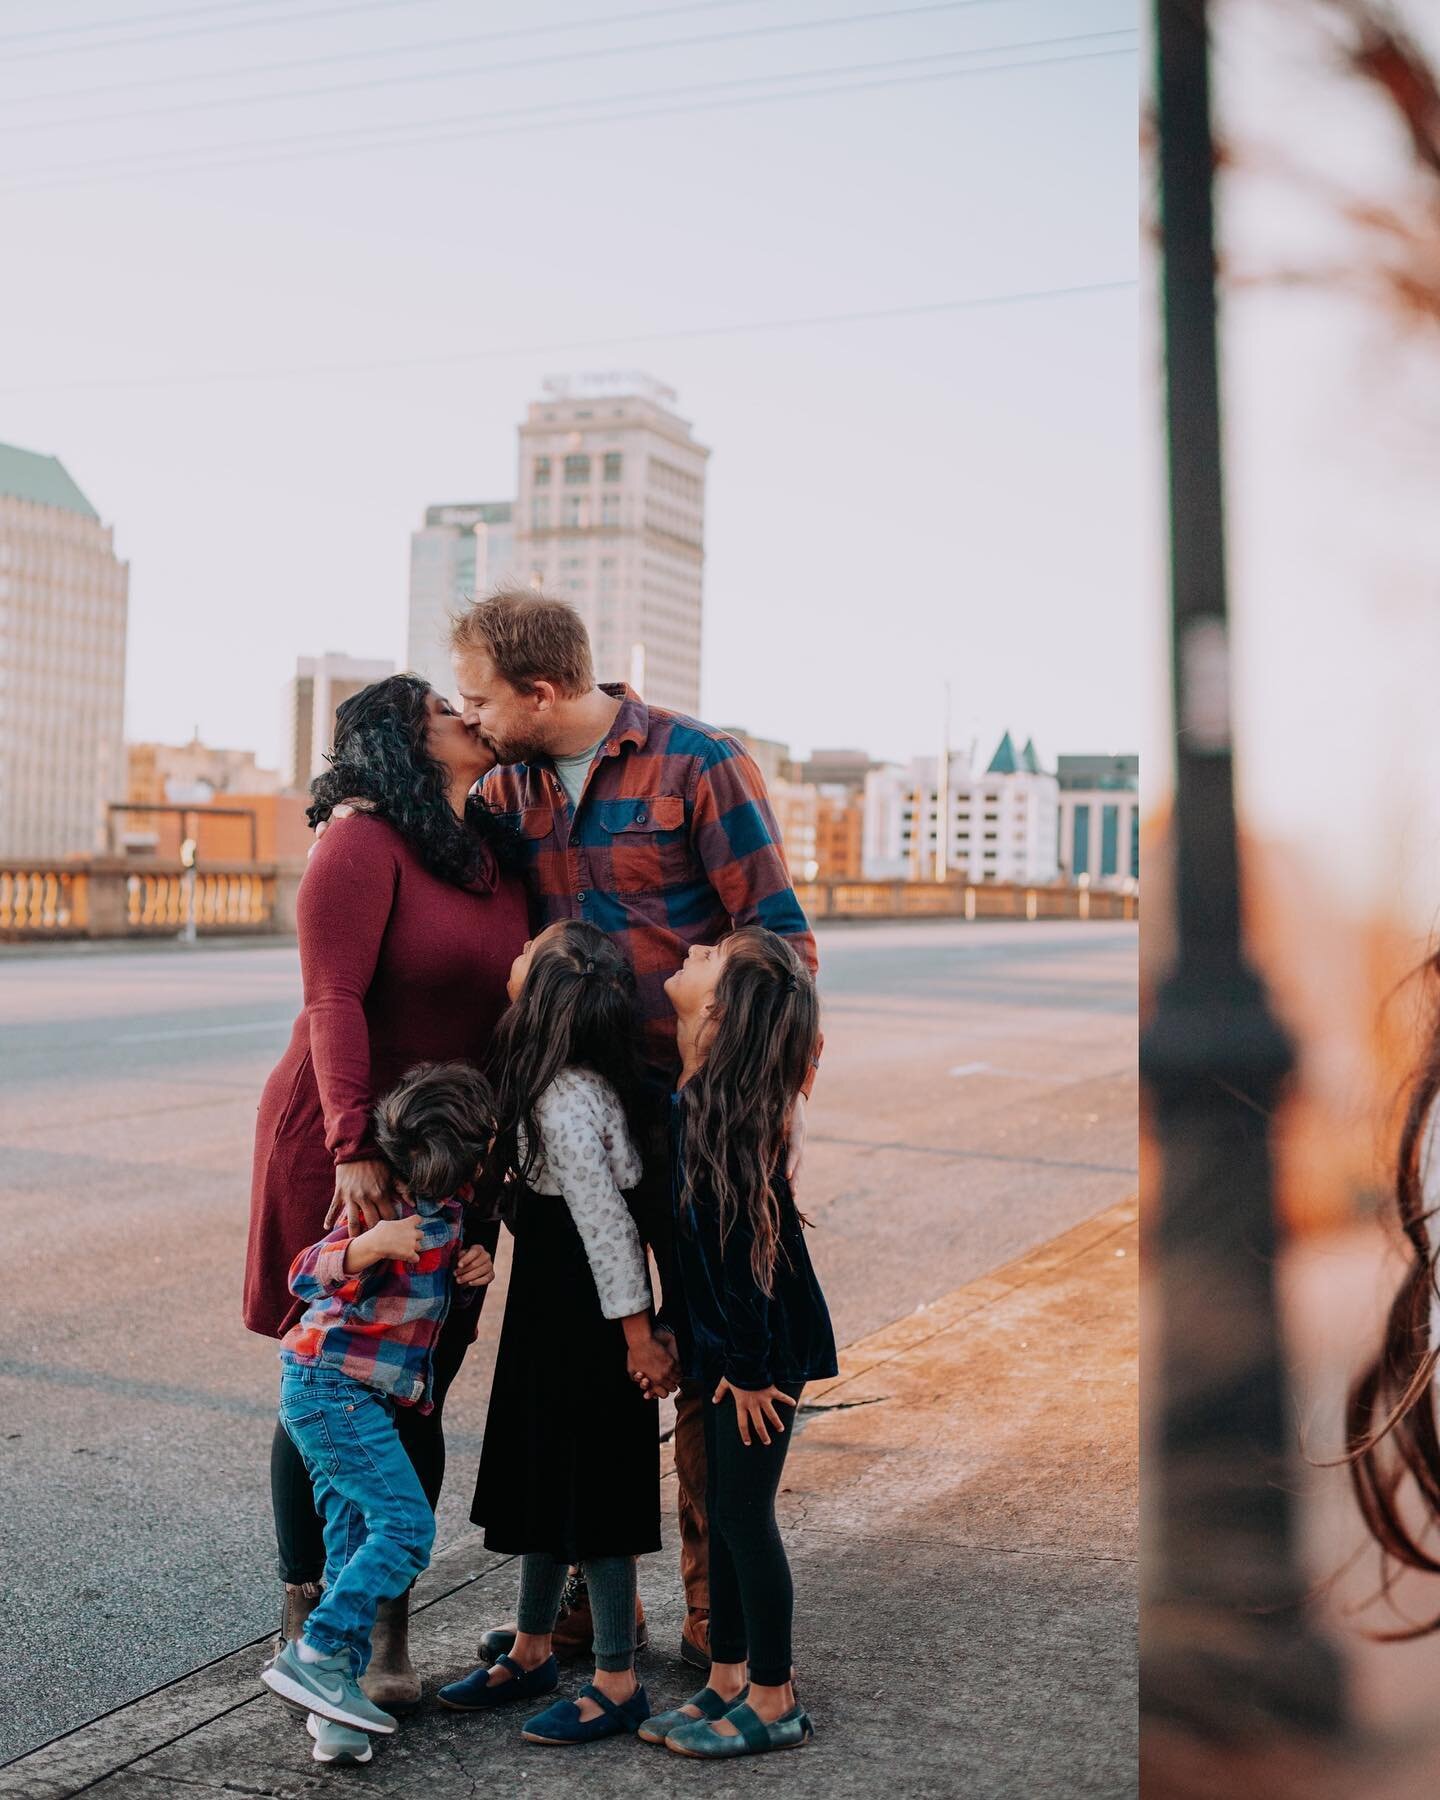 Never a dull moment with the Denson fam! Enjoyed taking a few shots of this vibrant, fun-loving crew around downtown Bham